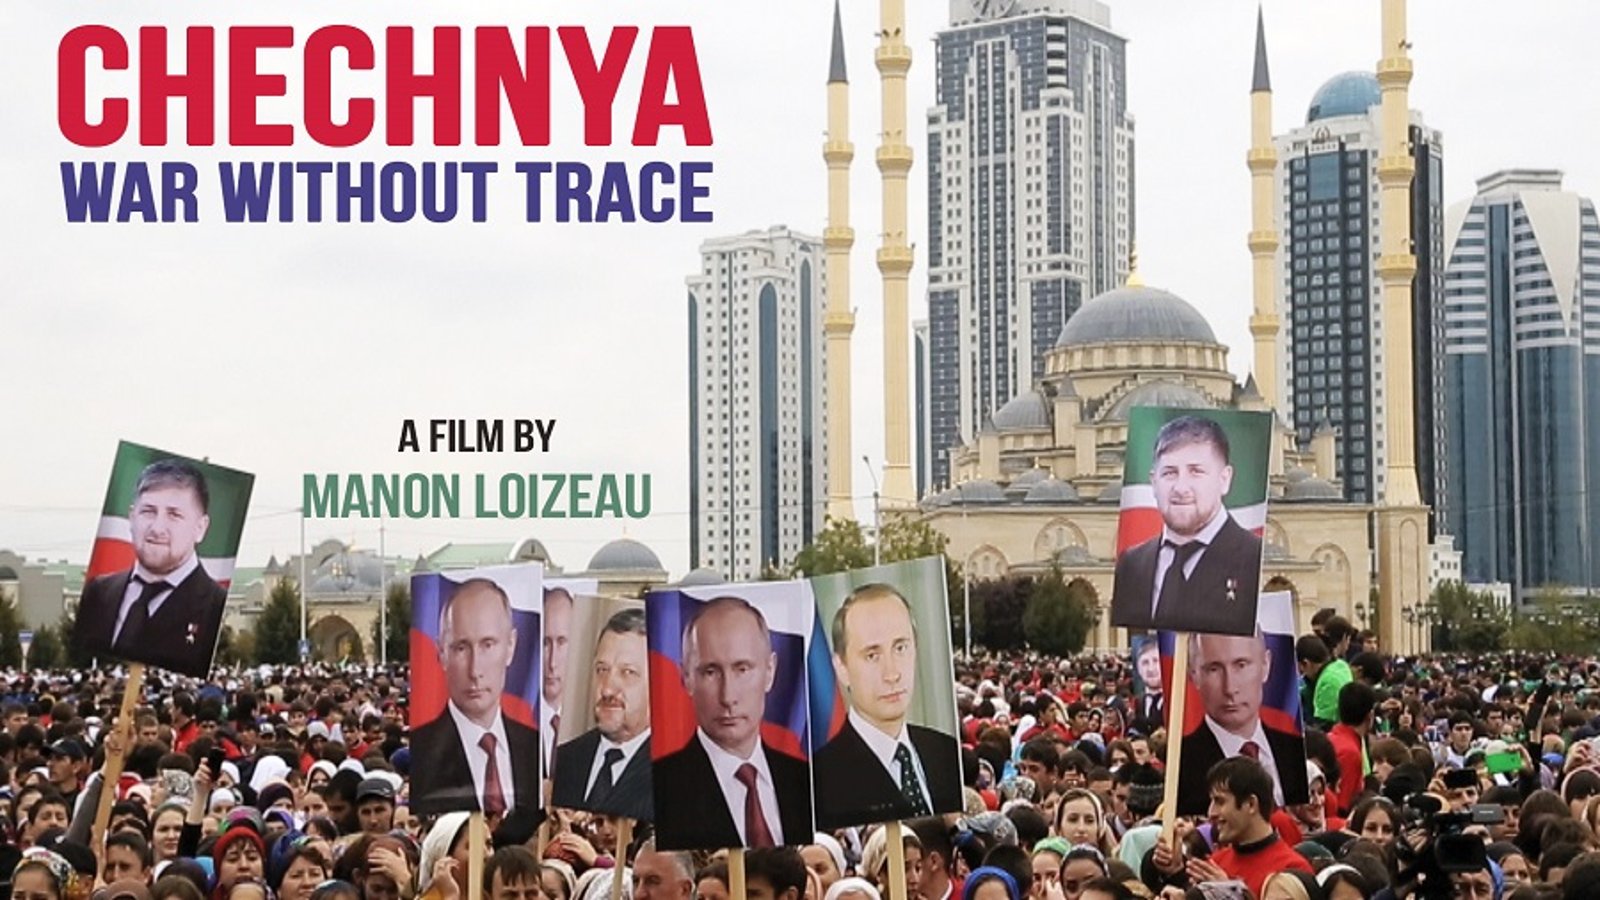 Chechnya: War without Trace - Political Oppression within The Chechen Republic